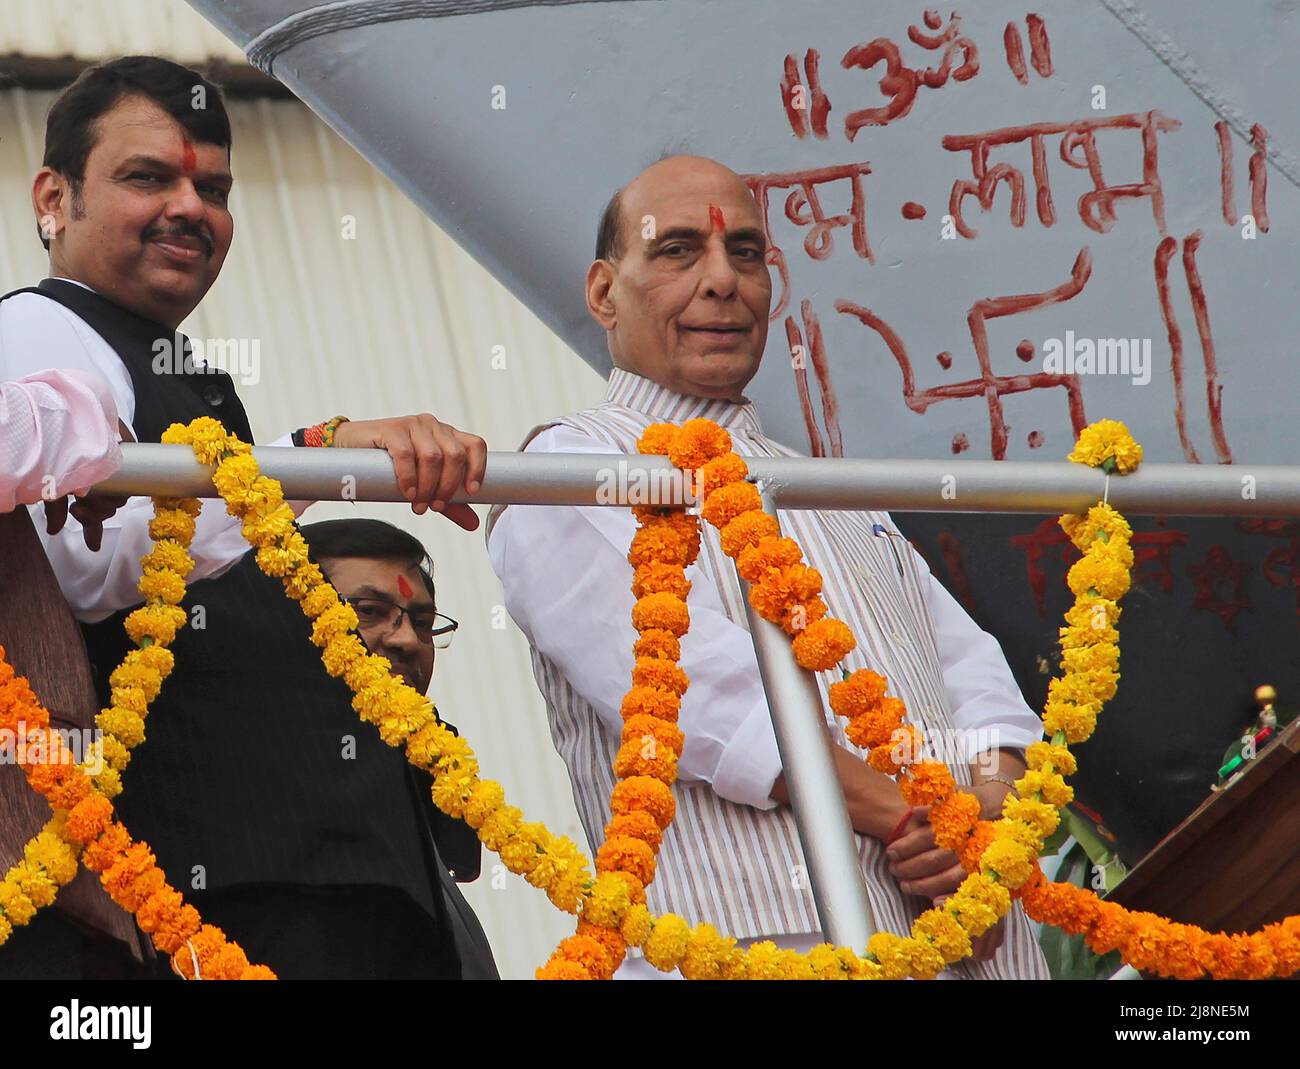 Mumbai, India. 17th May, 2022. L-R Bharatiya Janata Party (BJP) Leader of Opposition in Maharashtra Legislative Assembly, Devendra Fadnavis and Indian Defence Minister Rajnath Singh are seen at the launch of second advanced stealth frigate warship of P17A class at Mazagon Dock Shipbuilders Limited (MDL) in Mumbai. The warship 'Udaygiri' was launched by Indian Defence Minister Rajnath Singh who was the chief guest at the event. Credit: SOPA Images Limited/Alamy Live News Stock Photo